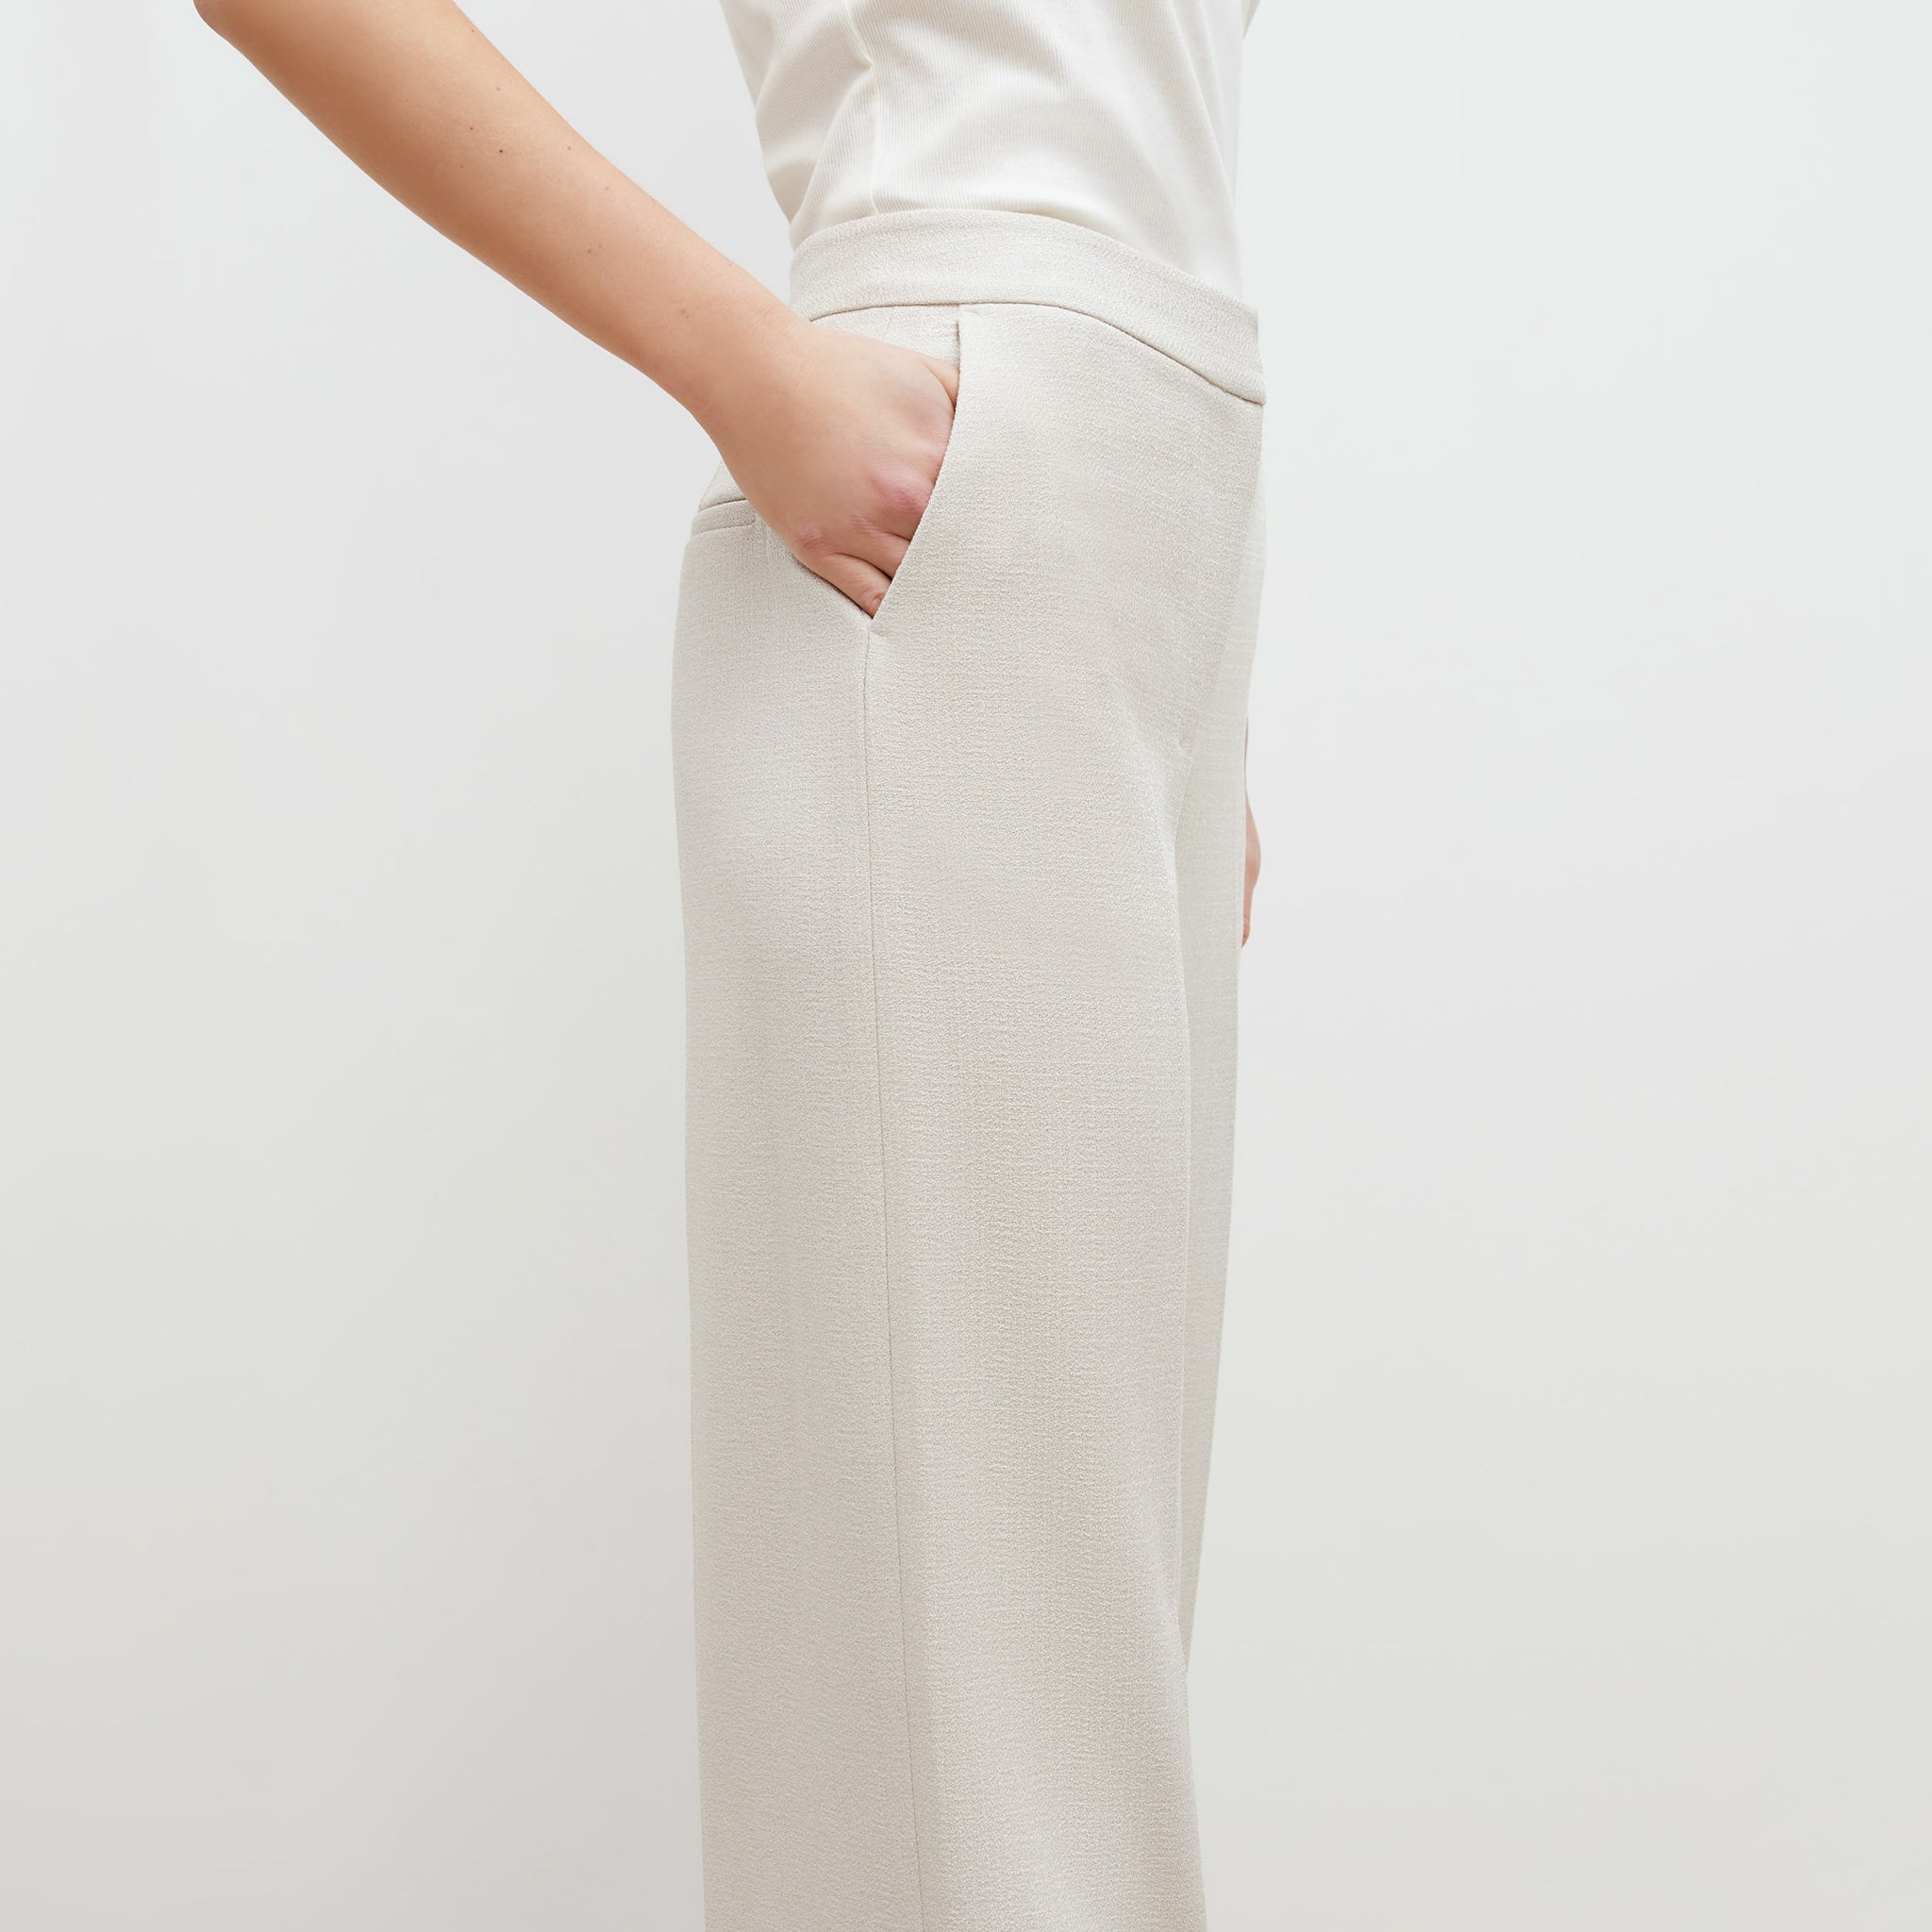 Side image of a woman standing wearing the anderson pant in textured suiting in magnolia